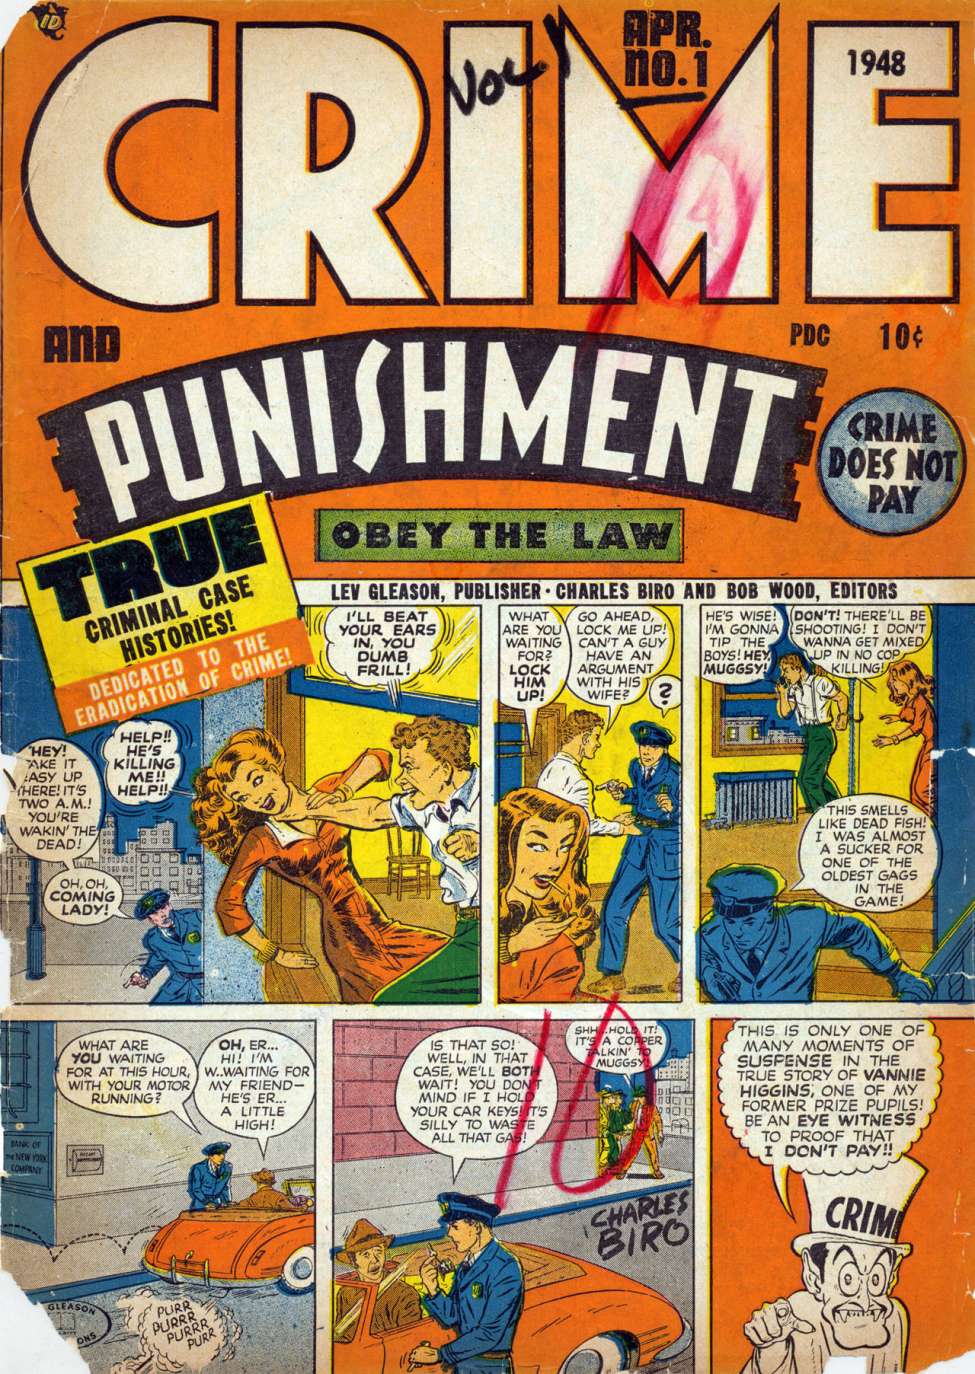 Book Cover For Crime and Punishment 1